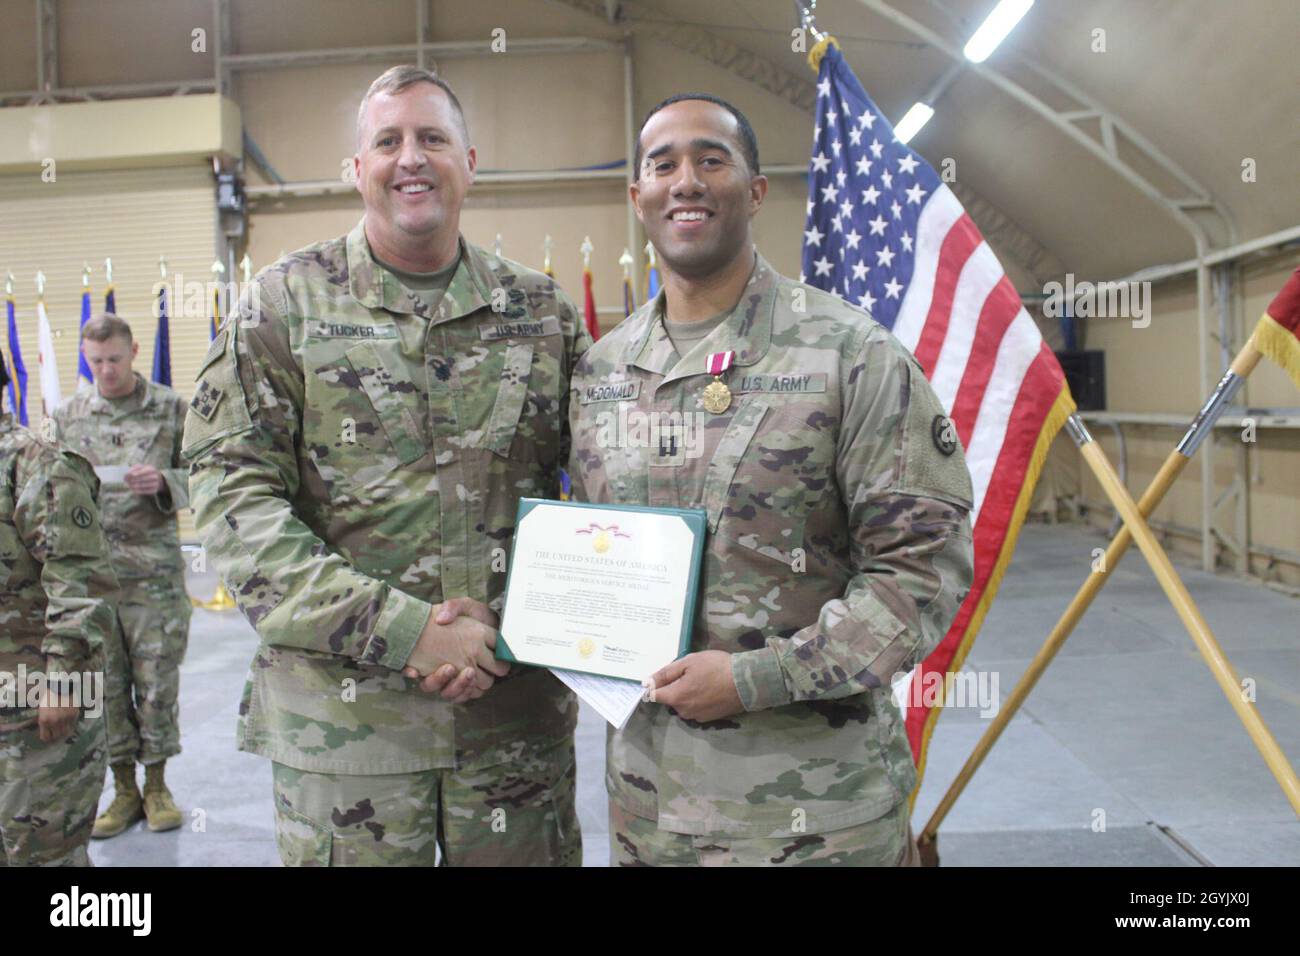 Lt. Col. Billy J. Tucker, 840th Transportation Battalion commander, poses with Capt. Michael D. McDonald following a Meritorious Service Medal ceremony at Camp Arijfan, Kuwait, Jan. 10, 2020. (U.S. Army photo by Claudia LaMantia) Stock Photo